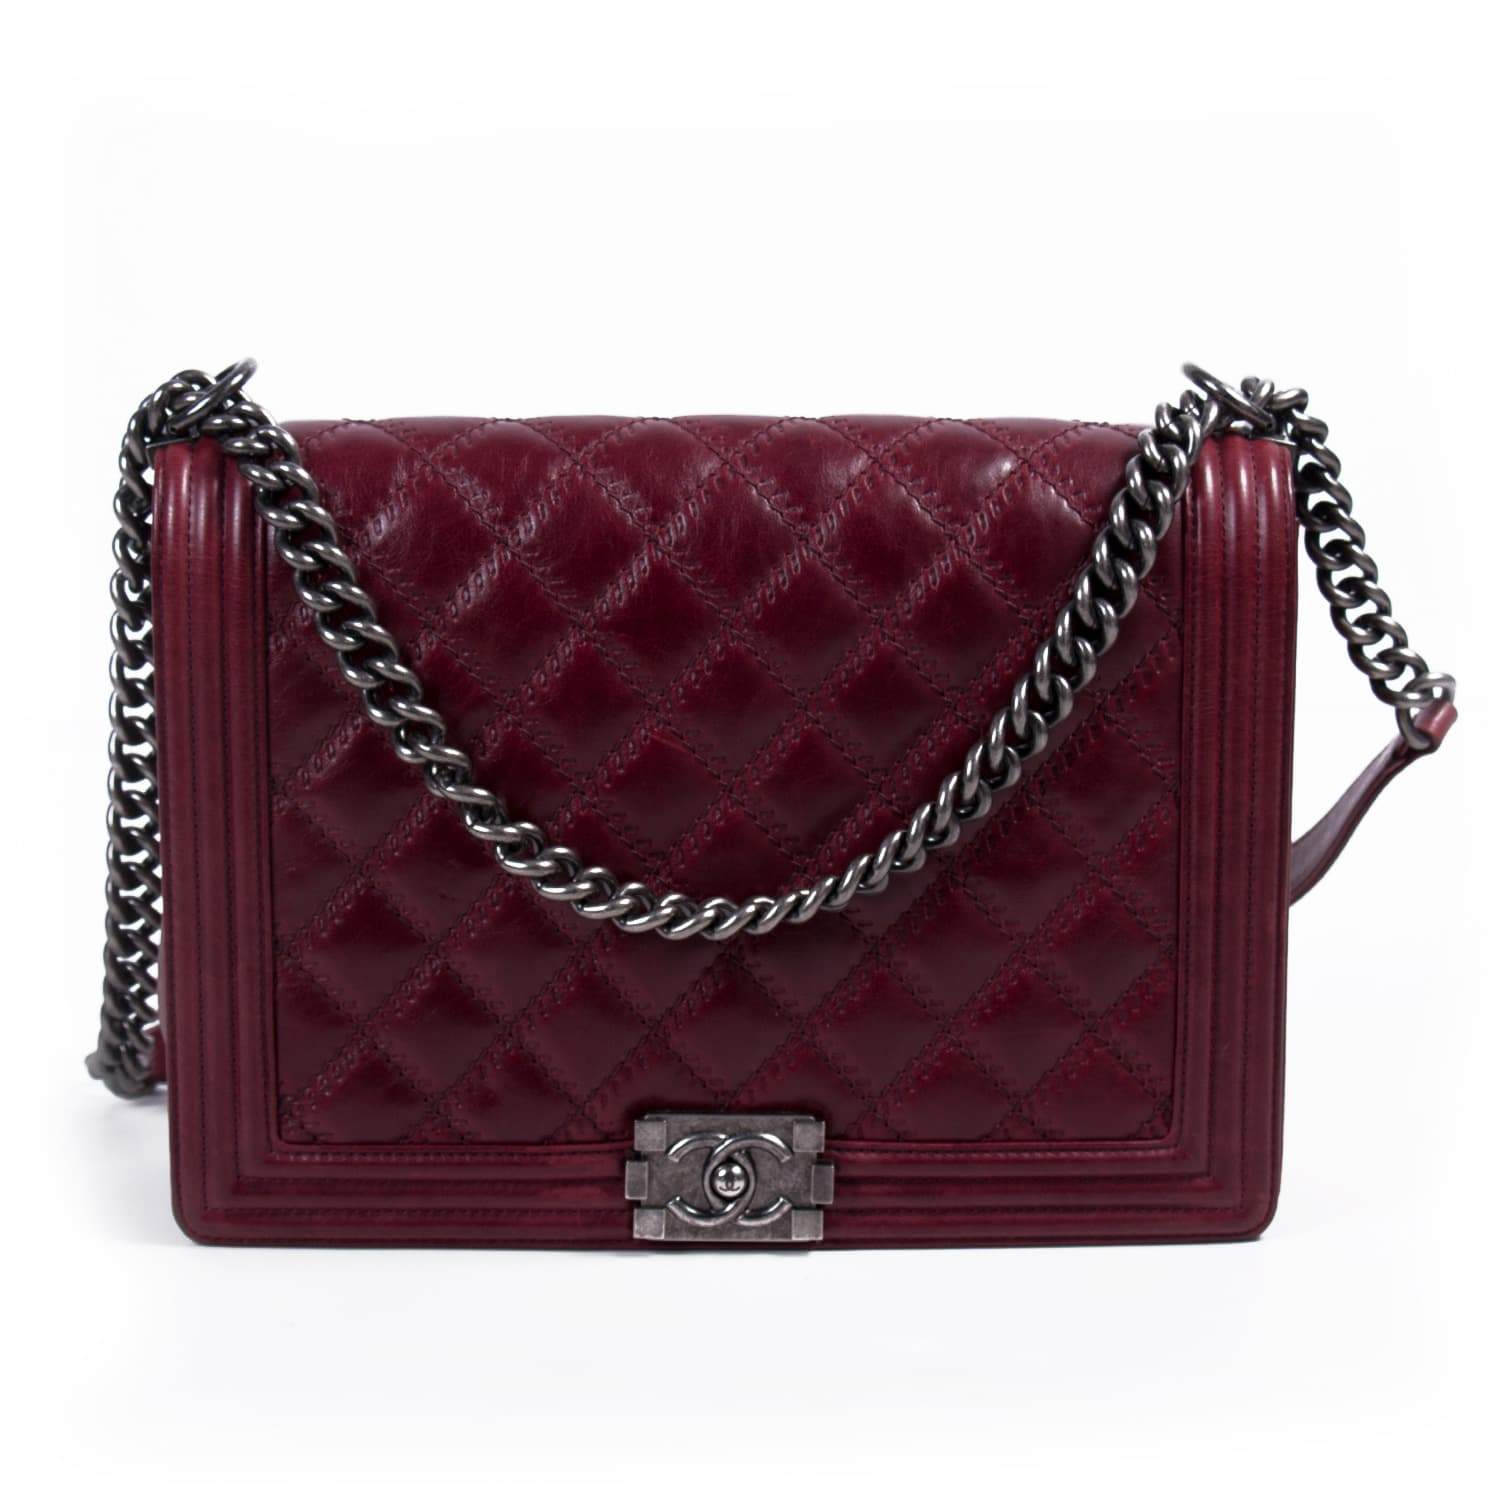 Chanel Large Burgundy Quilted Leather Large Boy Bag